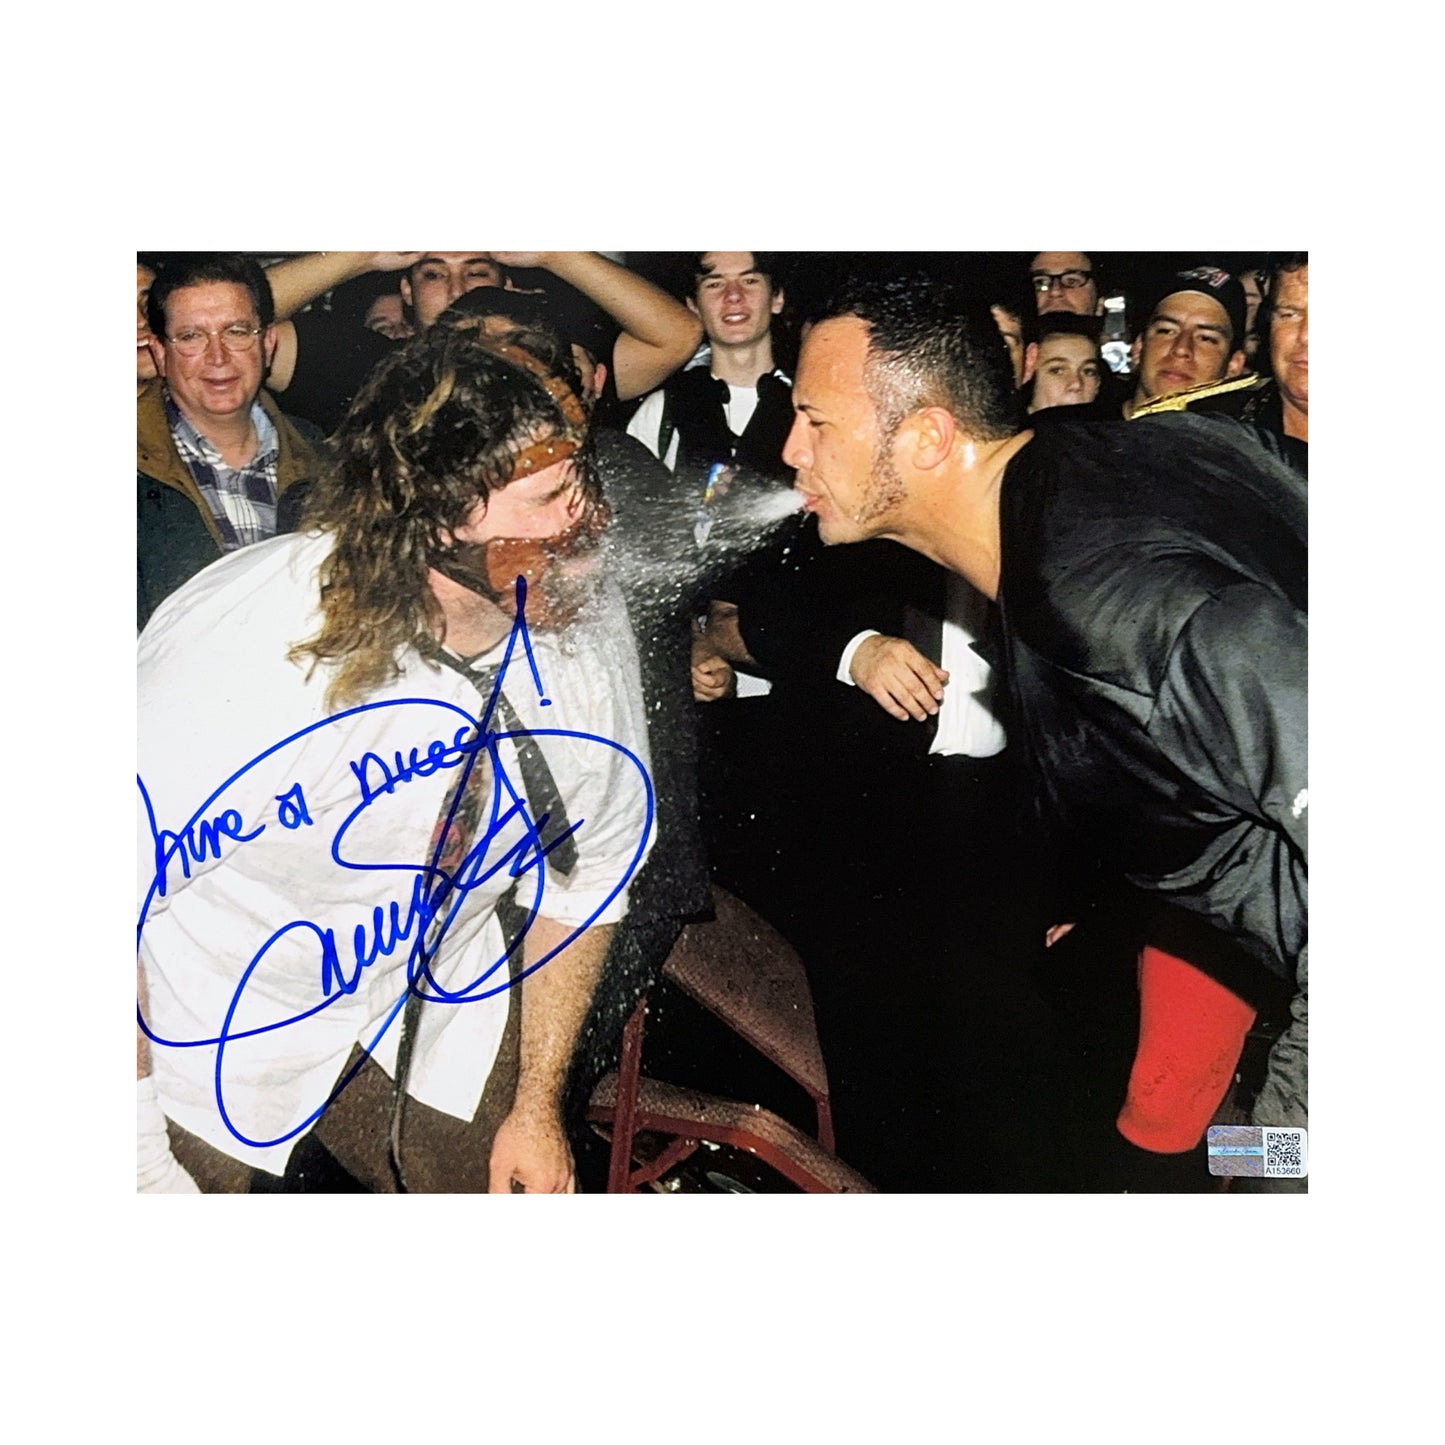 Mick Foley Autographed Mankind WWE Spit vs The Rock 8x10 “Have a Nice Day” Inscription Steiner CX